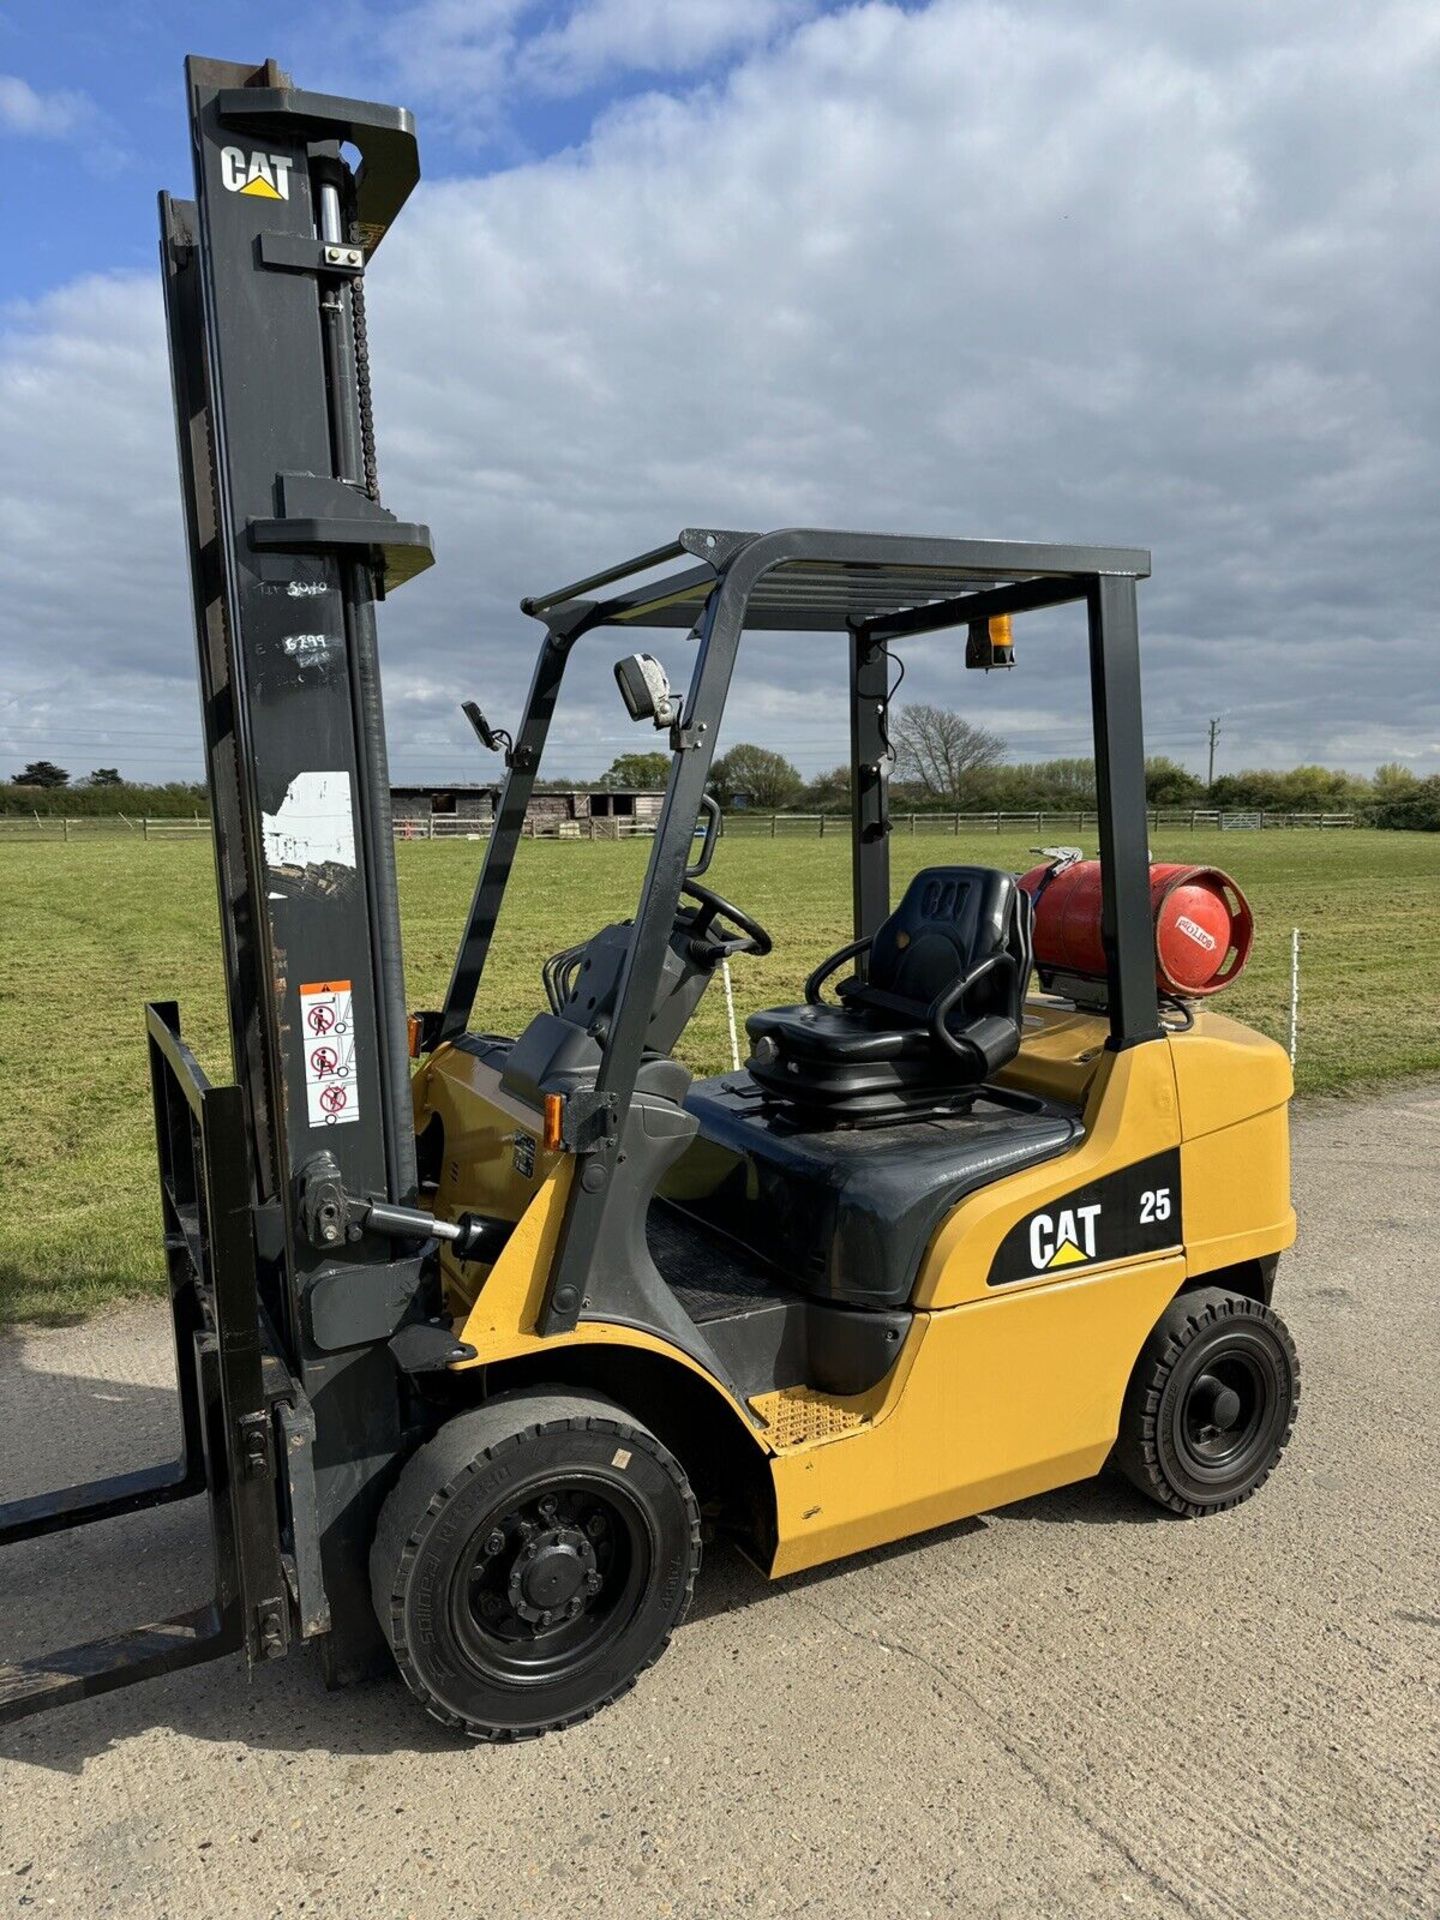 2015, CATERPILLAR - 2.5 Tonne Gas Forklift With Side Shift